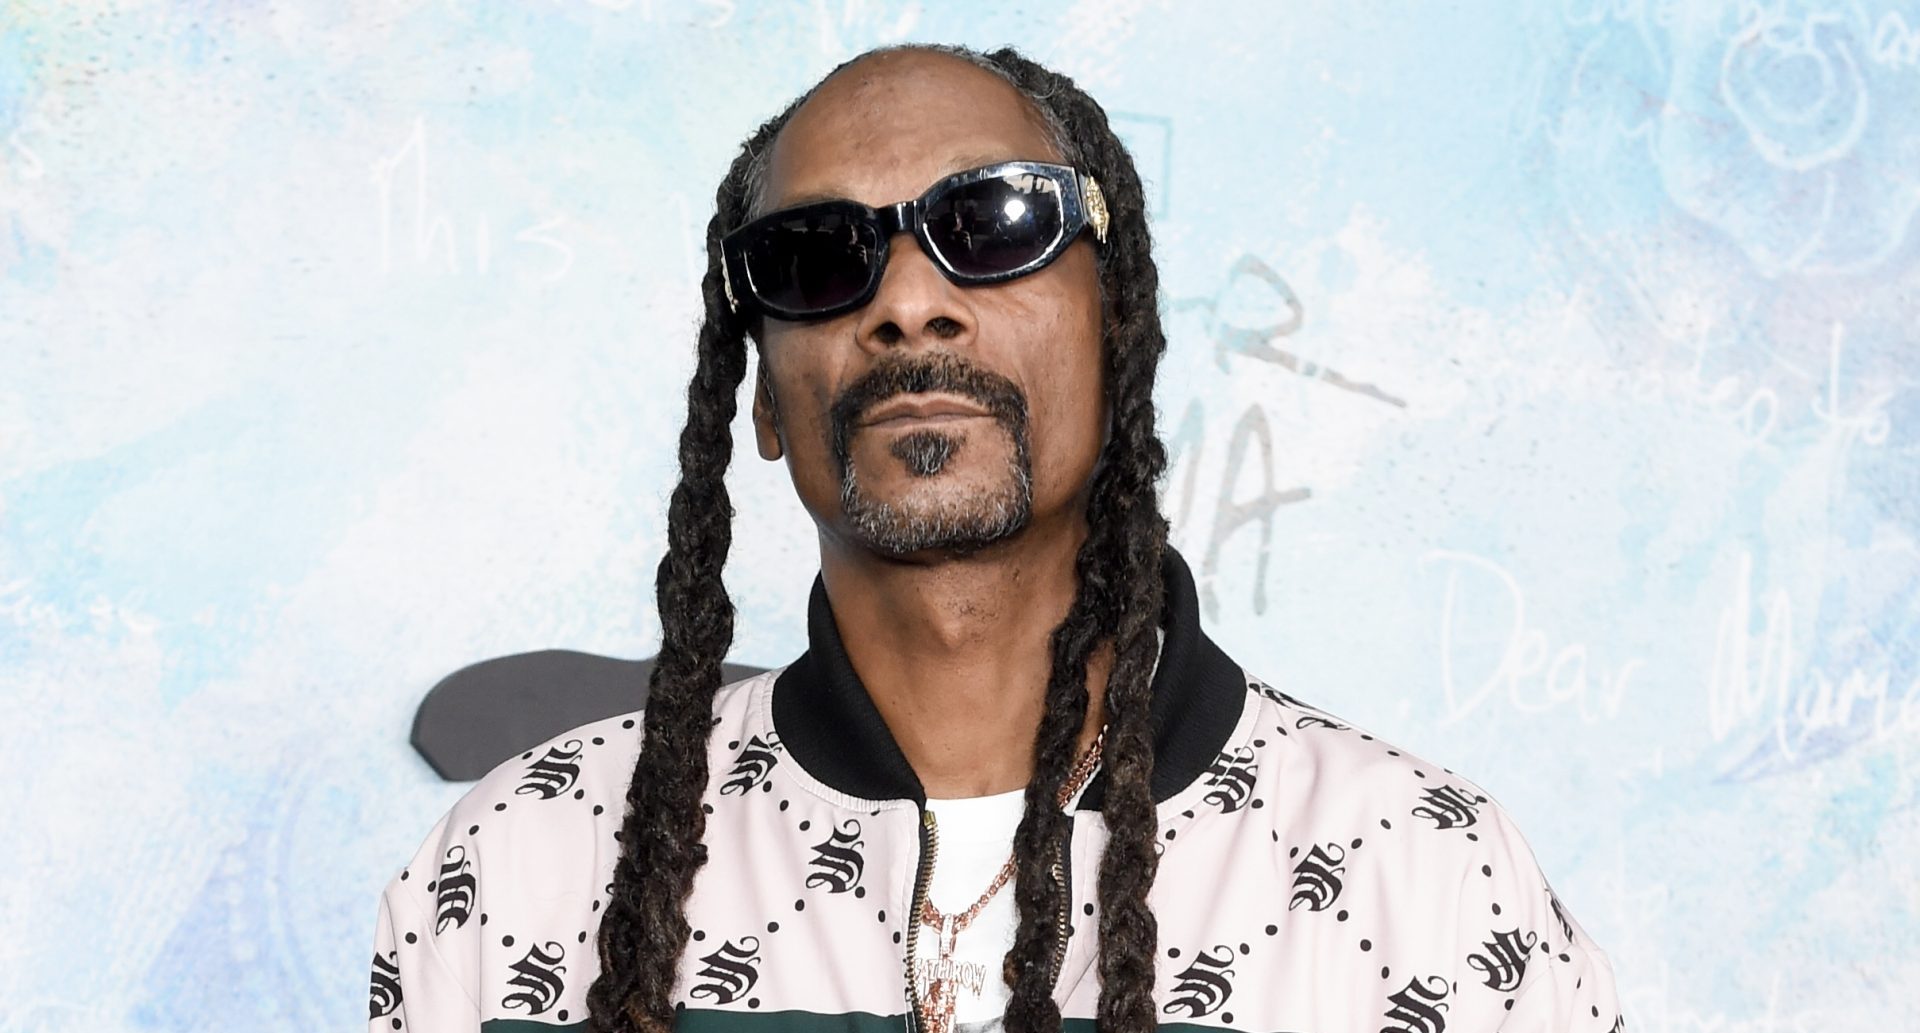 Say What?! Snoop Dogg Reveals He's Decided To "Give Up Smoke"